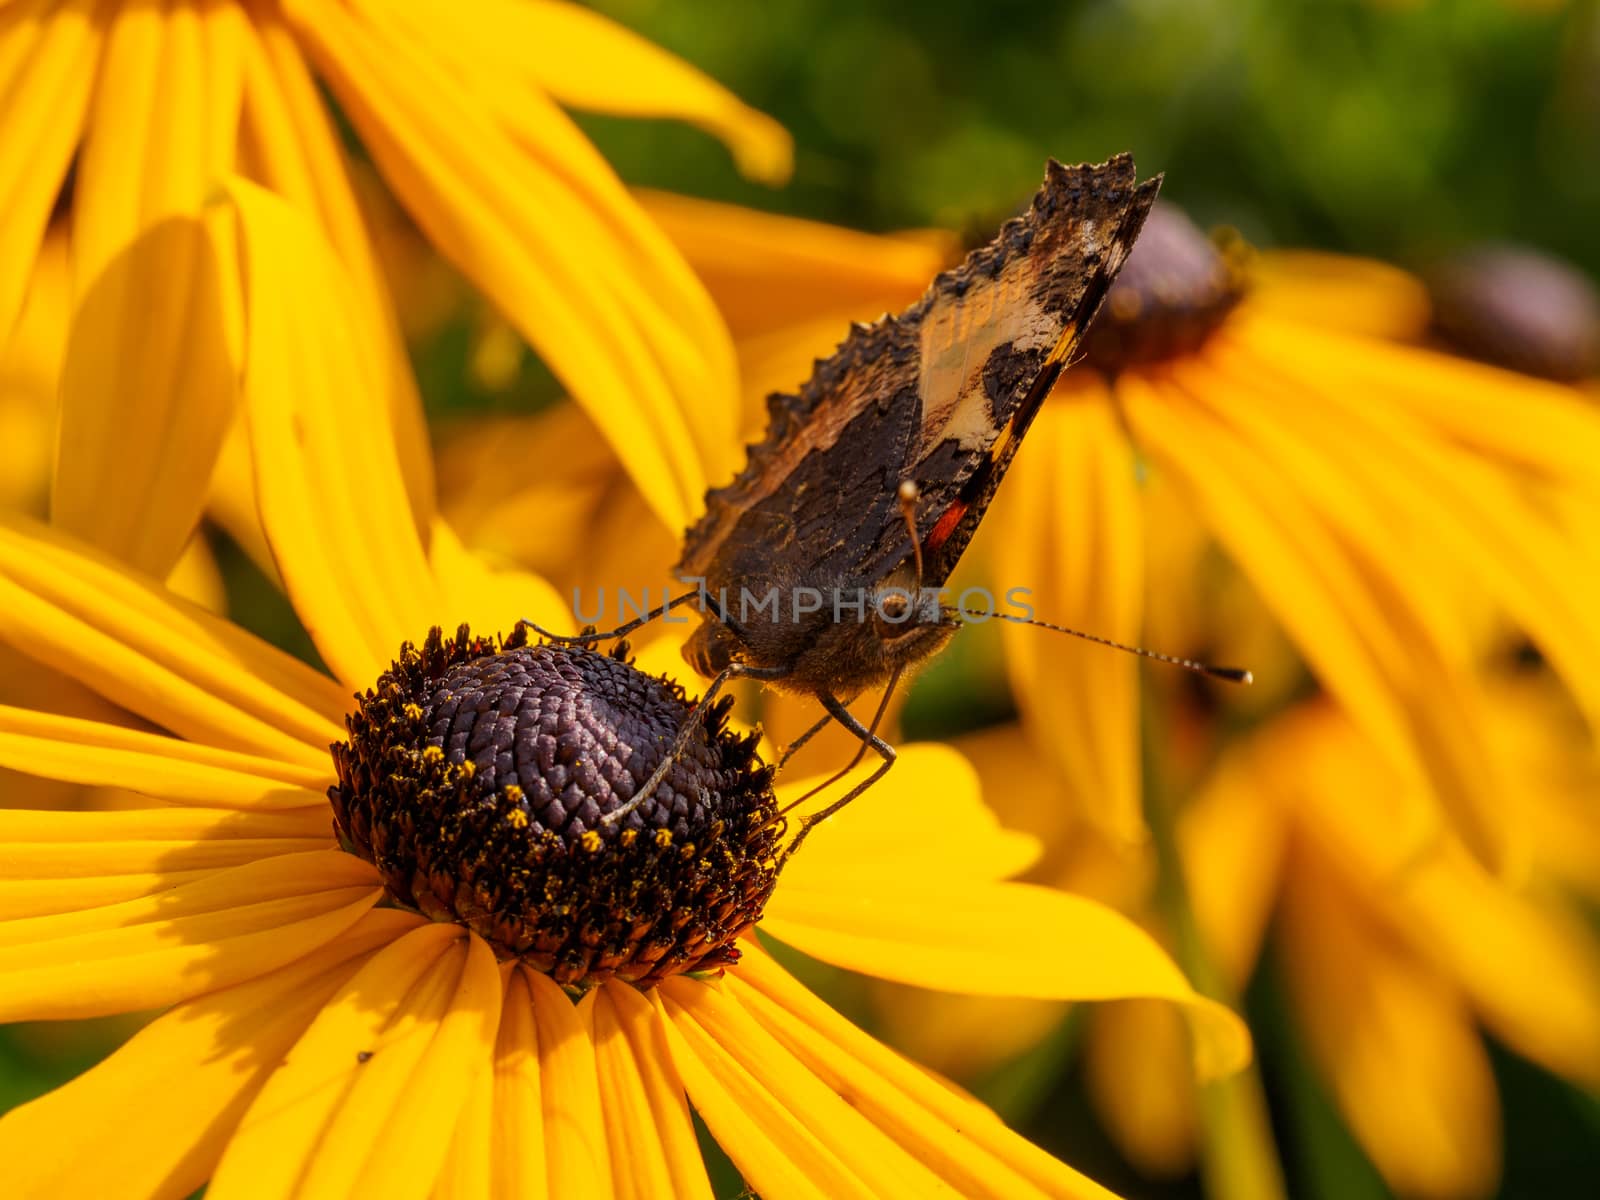 Creative angle shot of a wild butterfly resting on a yellow coneflower